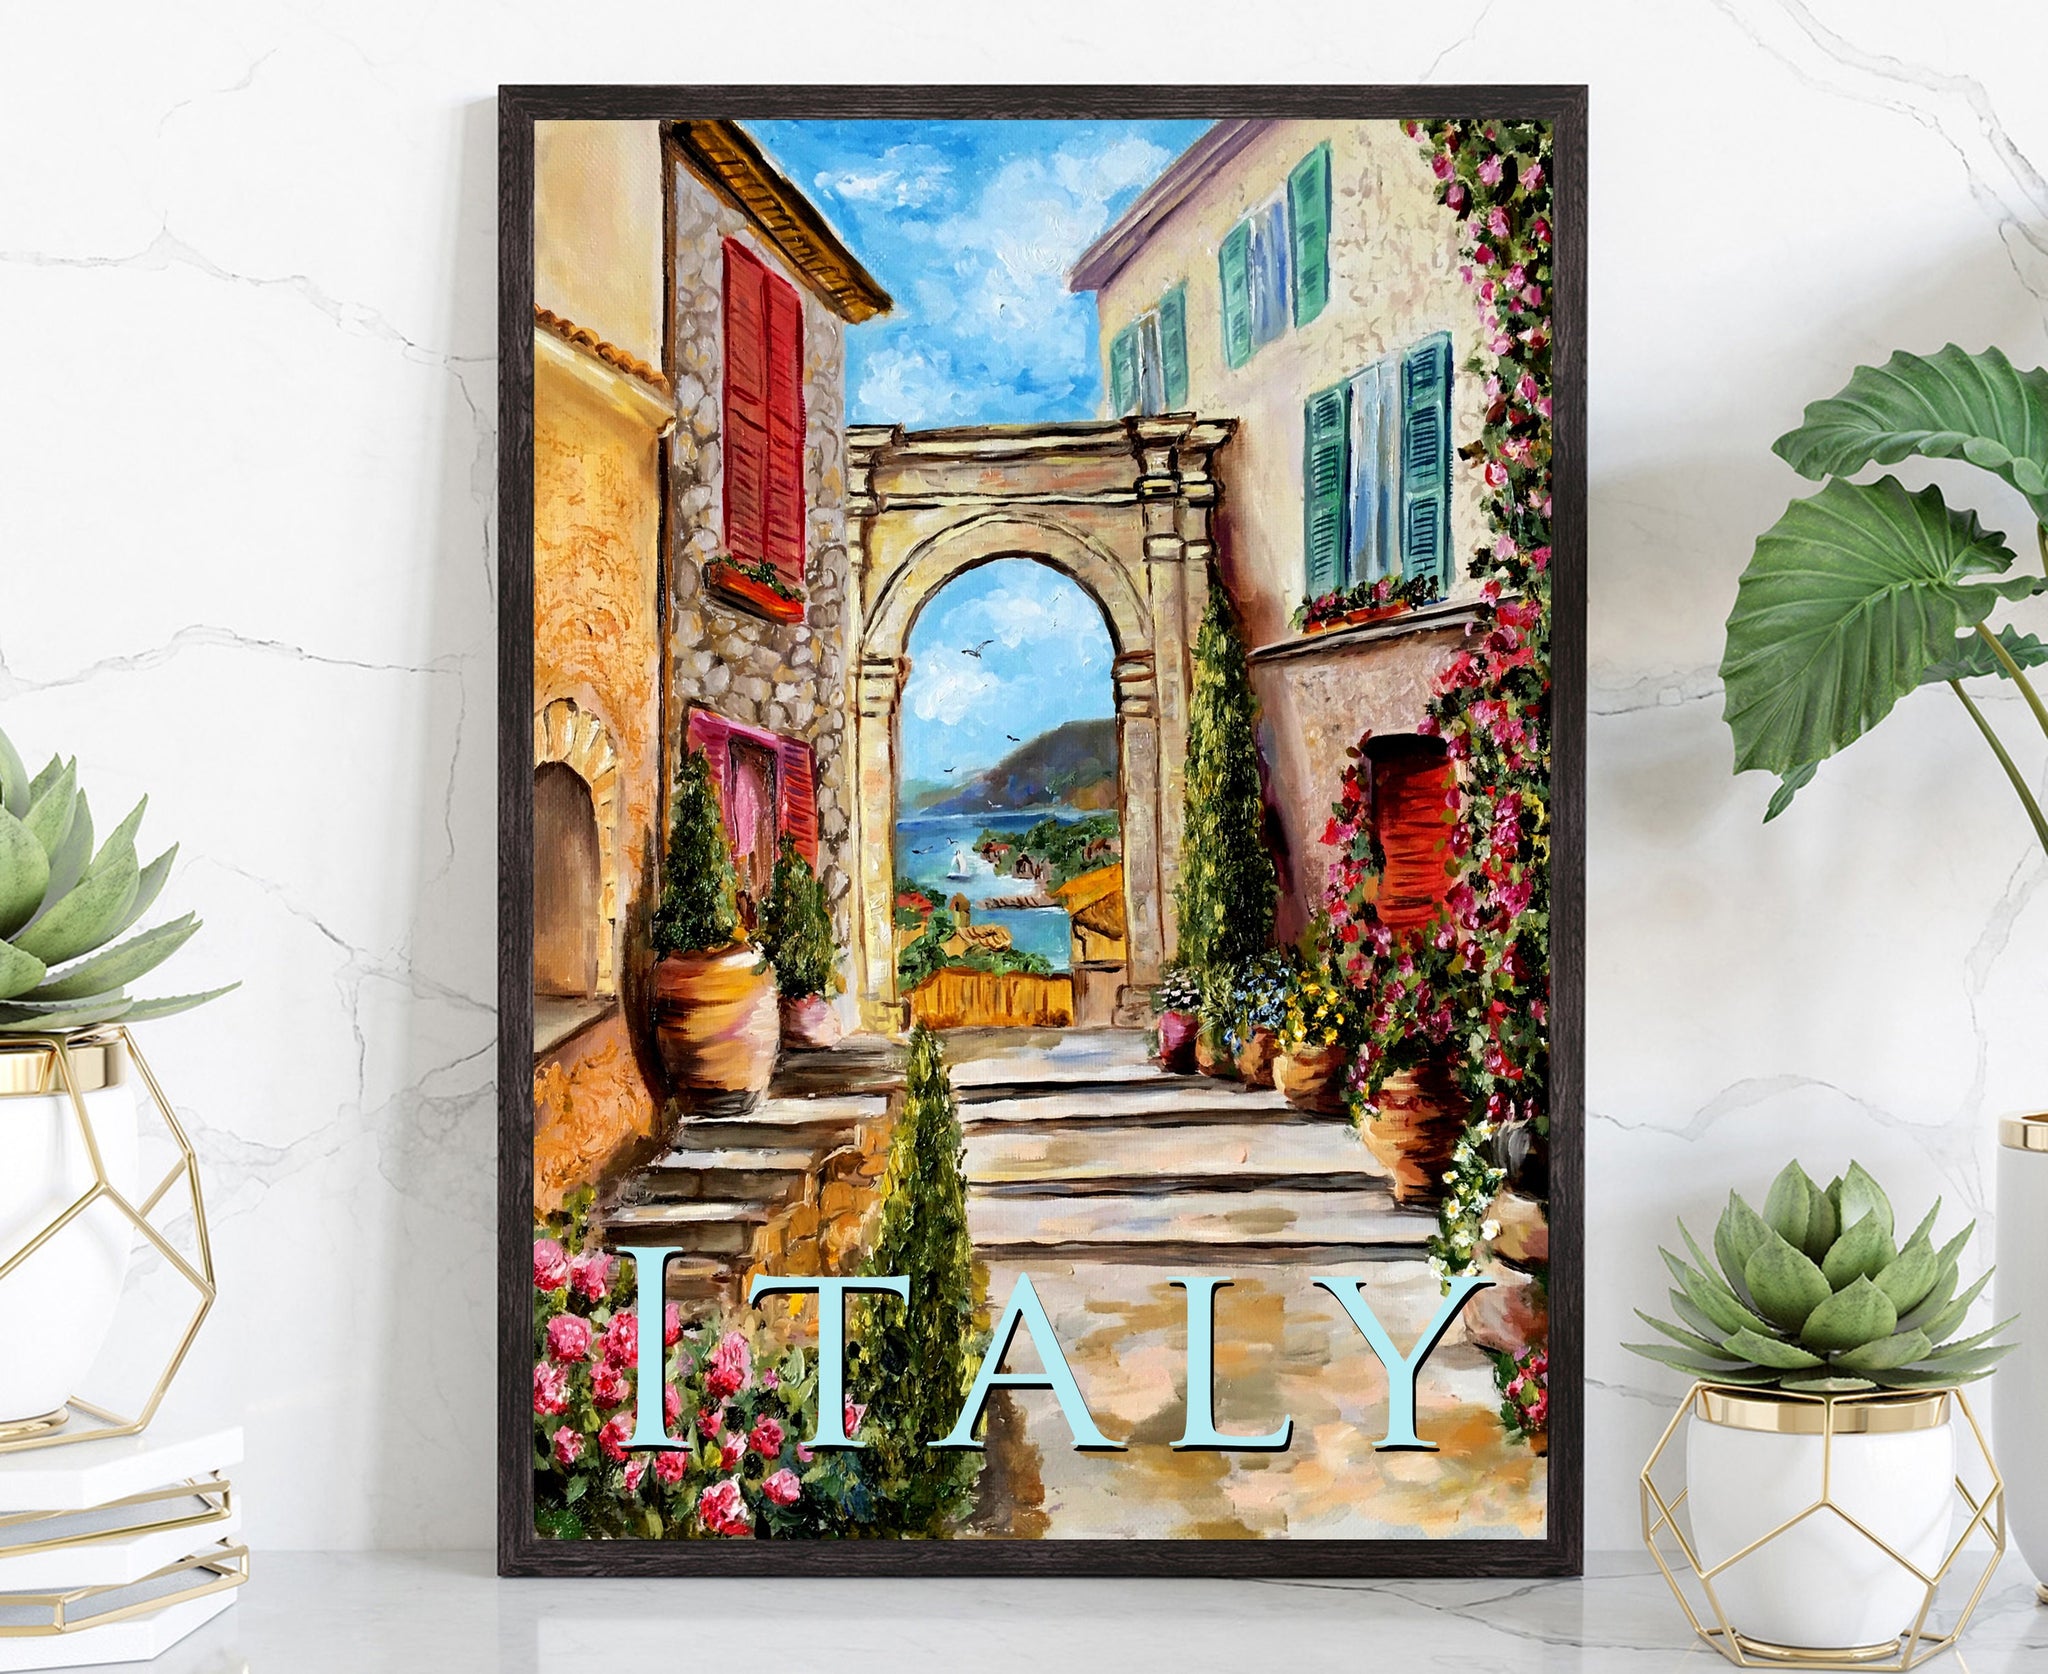 ITALY travel poster, Italy cityscape poster artwork, Italy landmark poster wall art, Home wall art, Office wall decoration, Birthday gift!